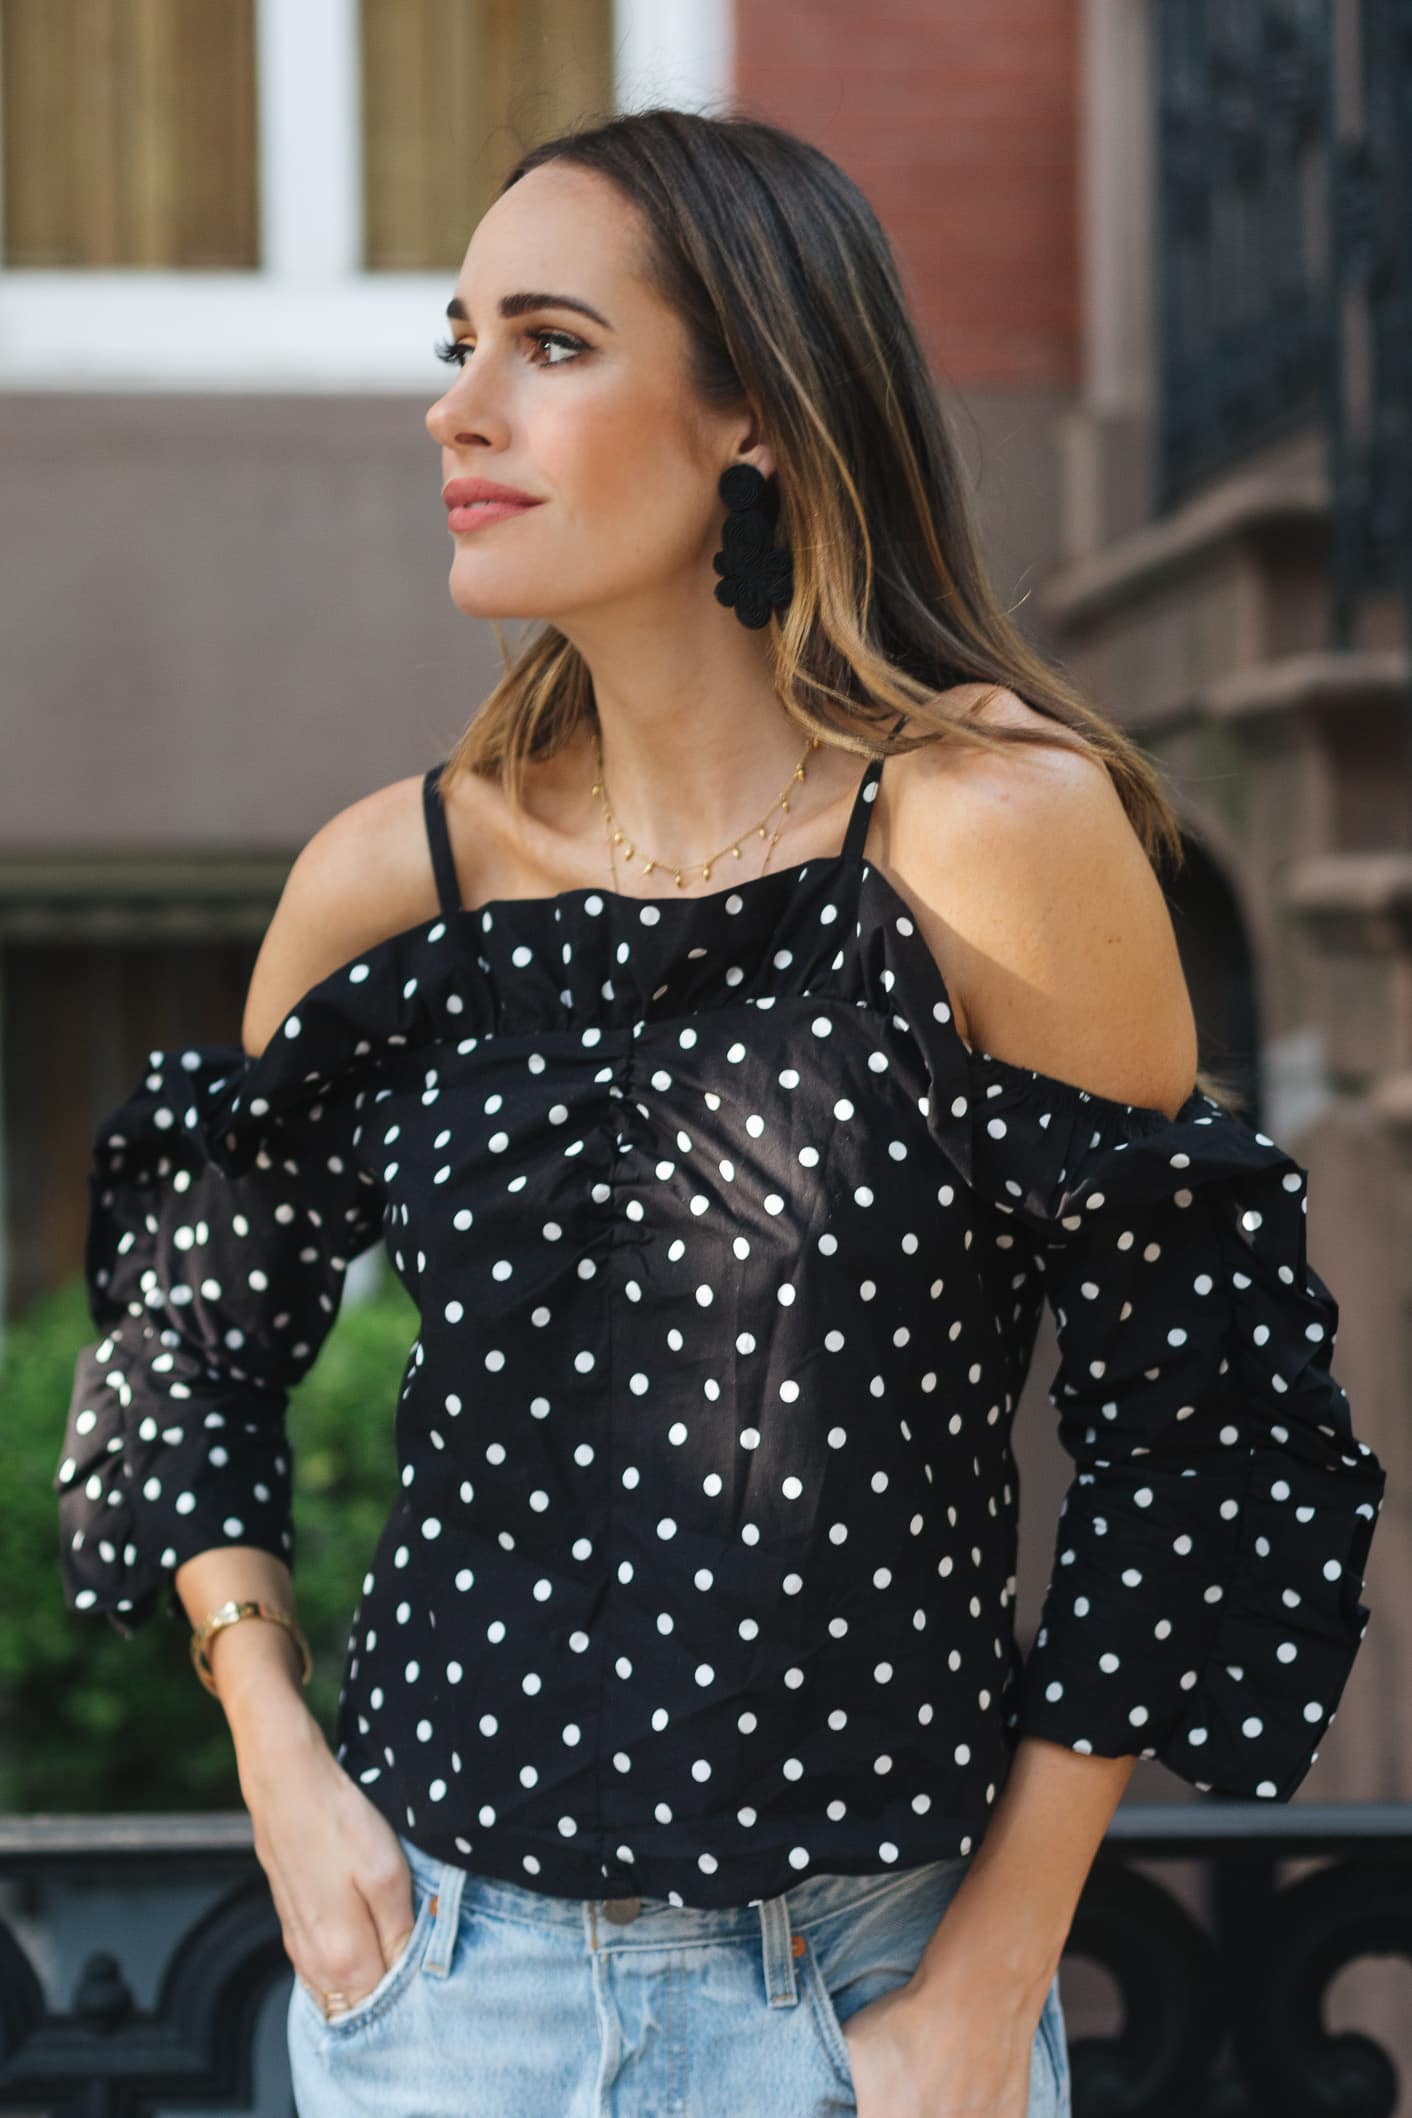 Louise Roe wearing polka dot top and mom jeans in NYC 1